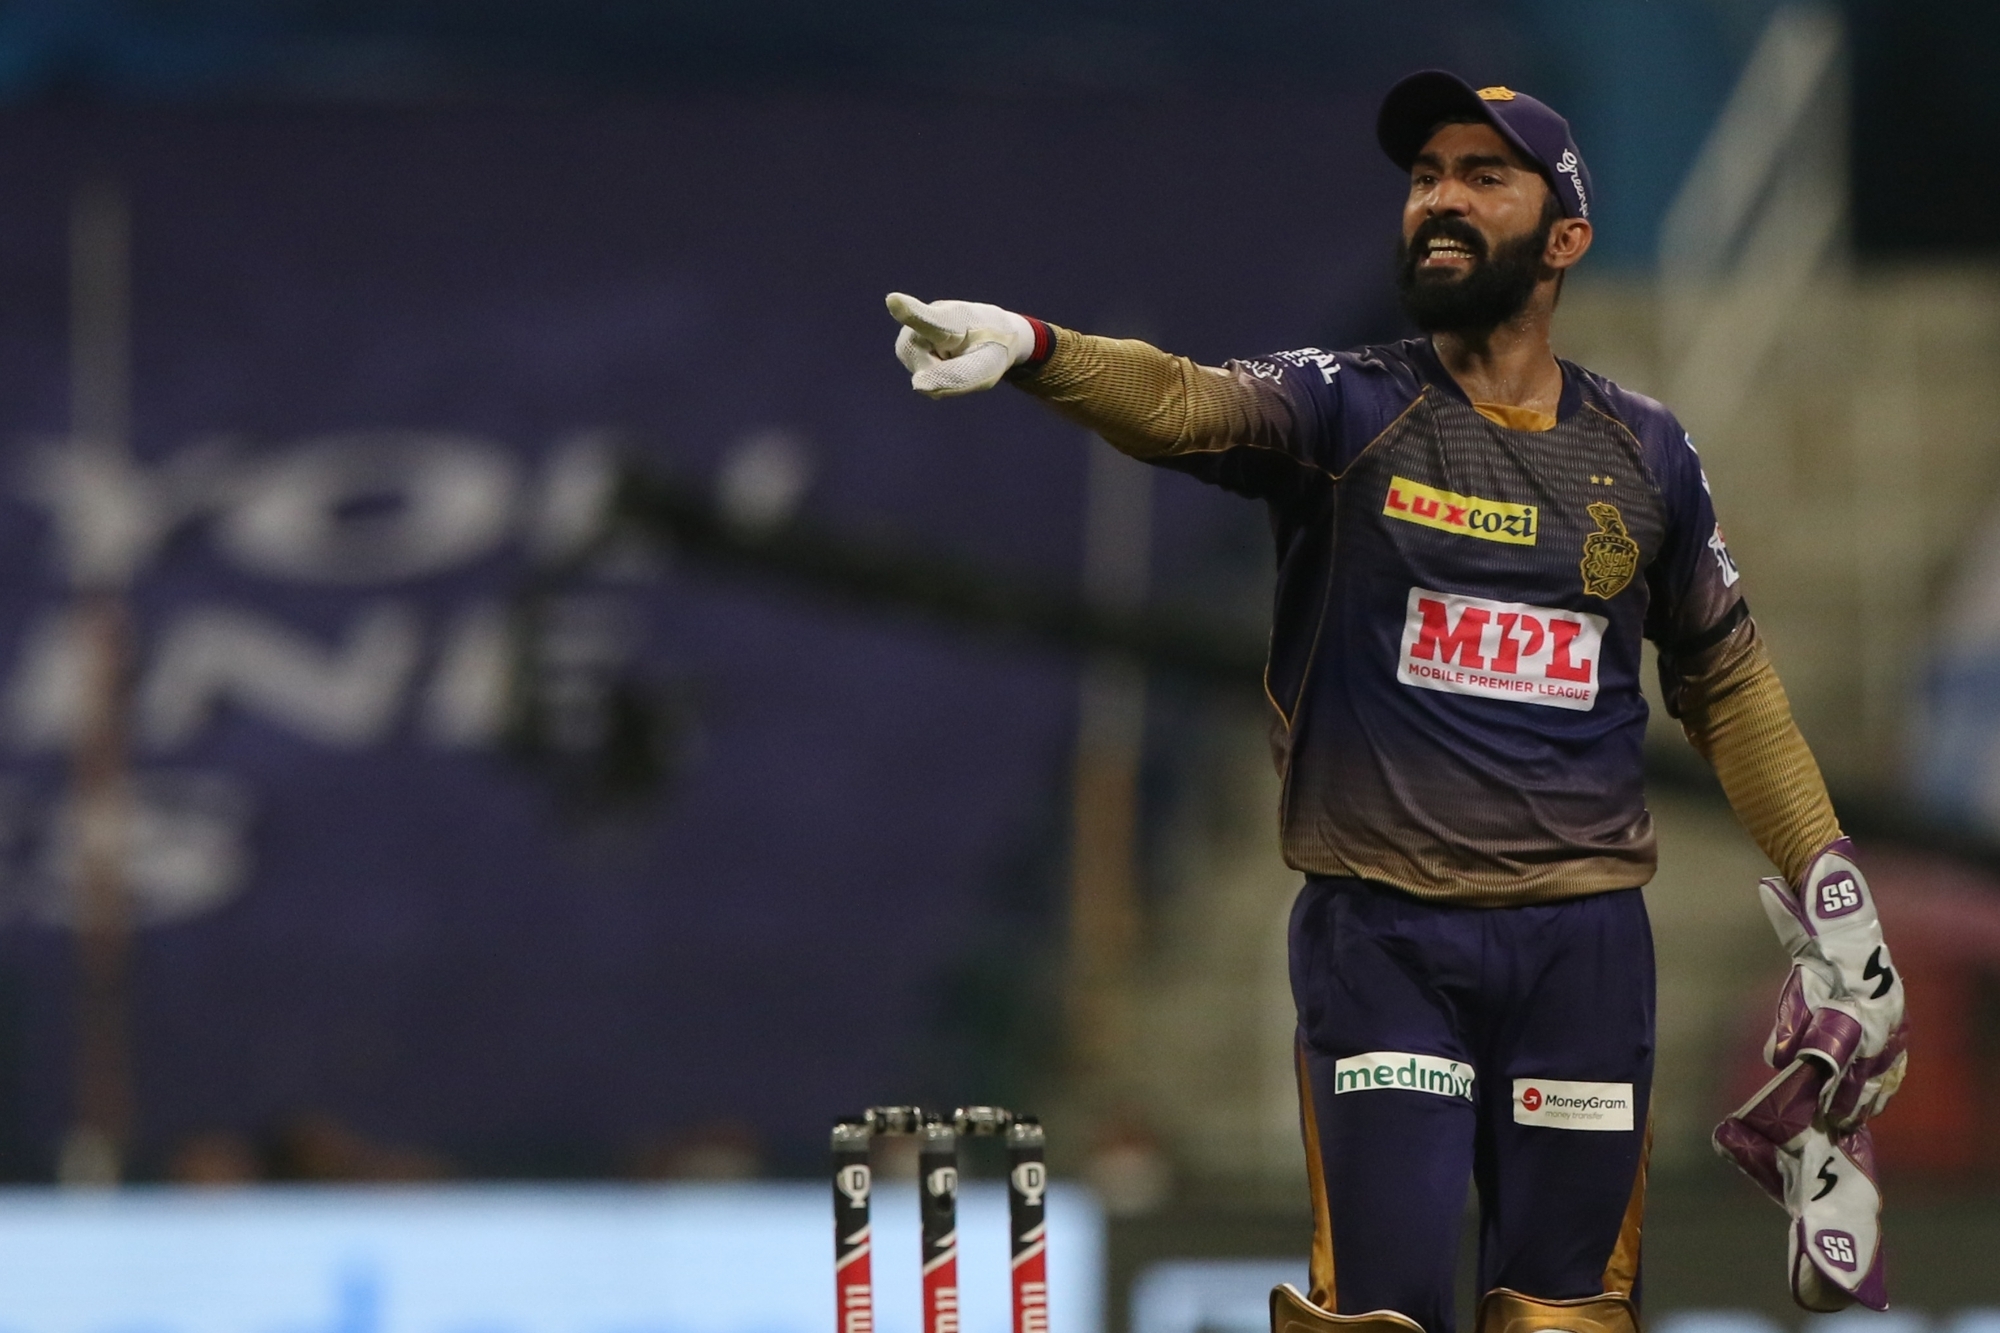 Dinesh Karthik's confidence took a beating leading him to giving up captaincy | BCCI/IPL